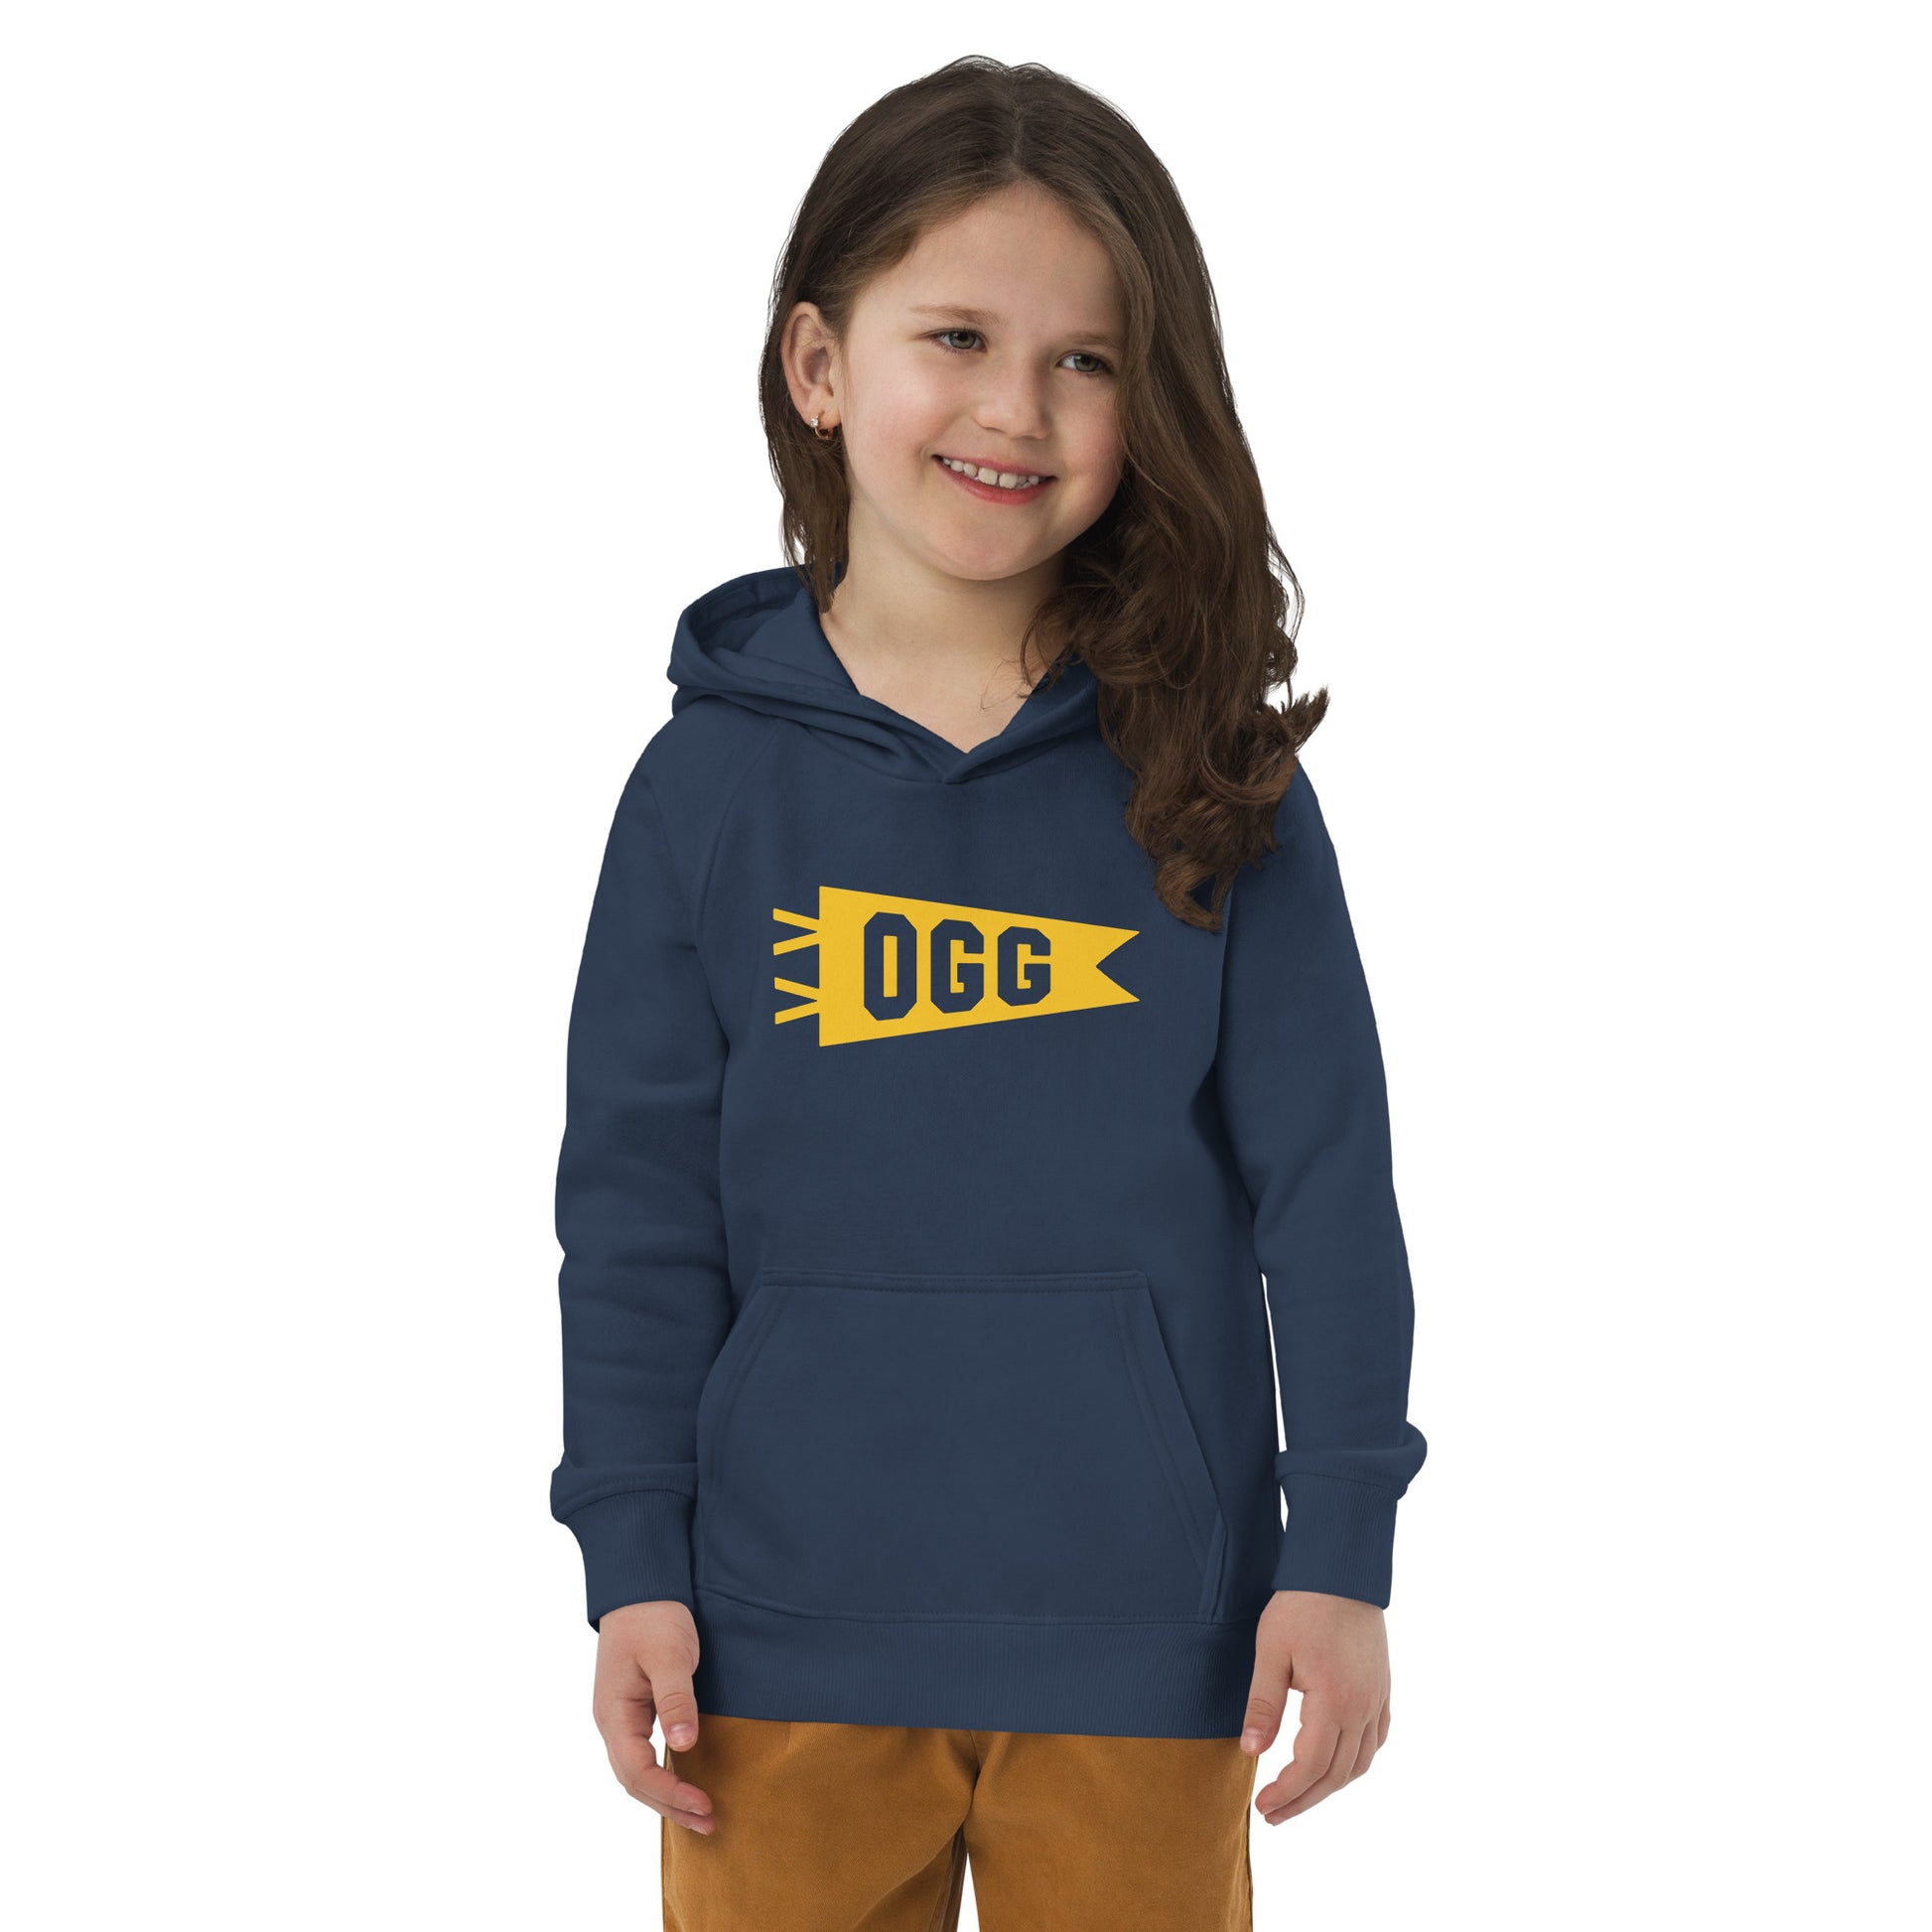 Kid's Sustainable Hoodie - Yellow Graphic • OGG Maui • YHM Designs - Image 07